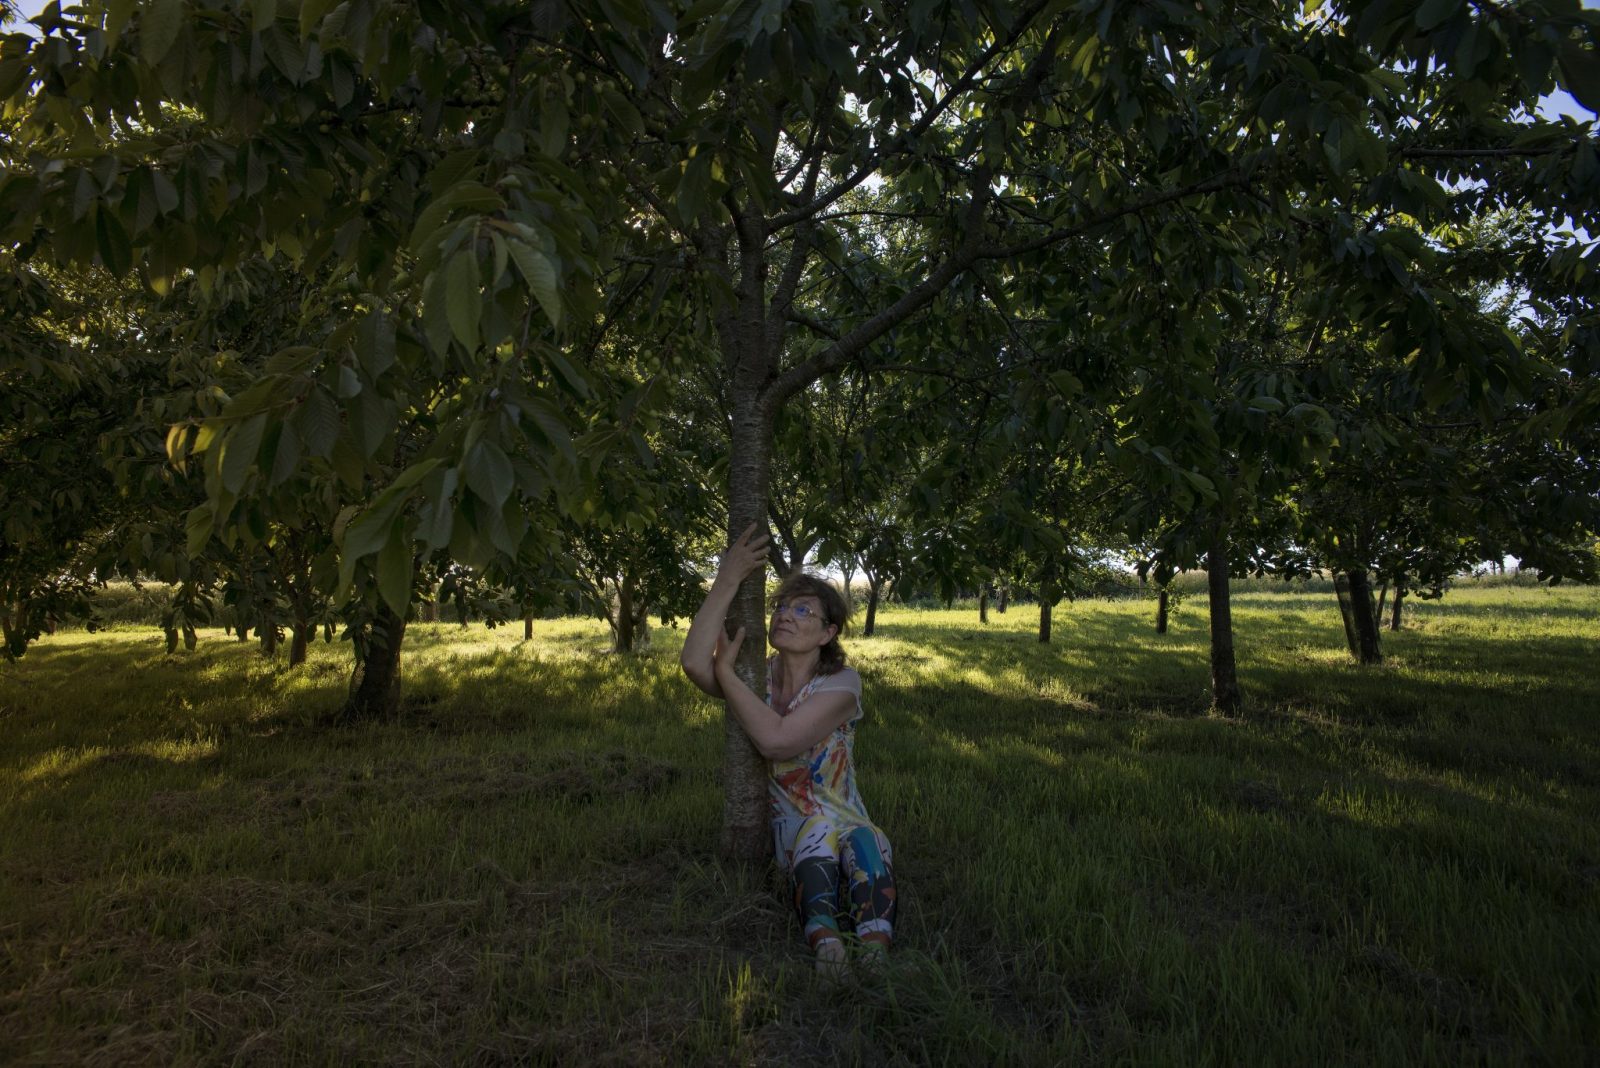 Béatrice, tree hugger, and her cherry hugged tree (Mayenne, 2017)
"Trees are not human beings, nor animals, nor dogs. I like trees for what they are: trees with mysteries, trees that can be found at the center of a meadow, at the end of a garden, on the side of a street..."
"Les arbres ne sont ni des êtres humains, ni des animaux, ni des dieux. J'aime les arbres pour ce qu'ils sont, des arbres dans leur mystère et leur évidence d'arbres au centre d'un pré, au fond d'un jardin, au coin d'une rue."